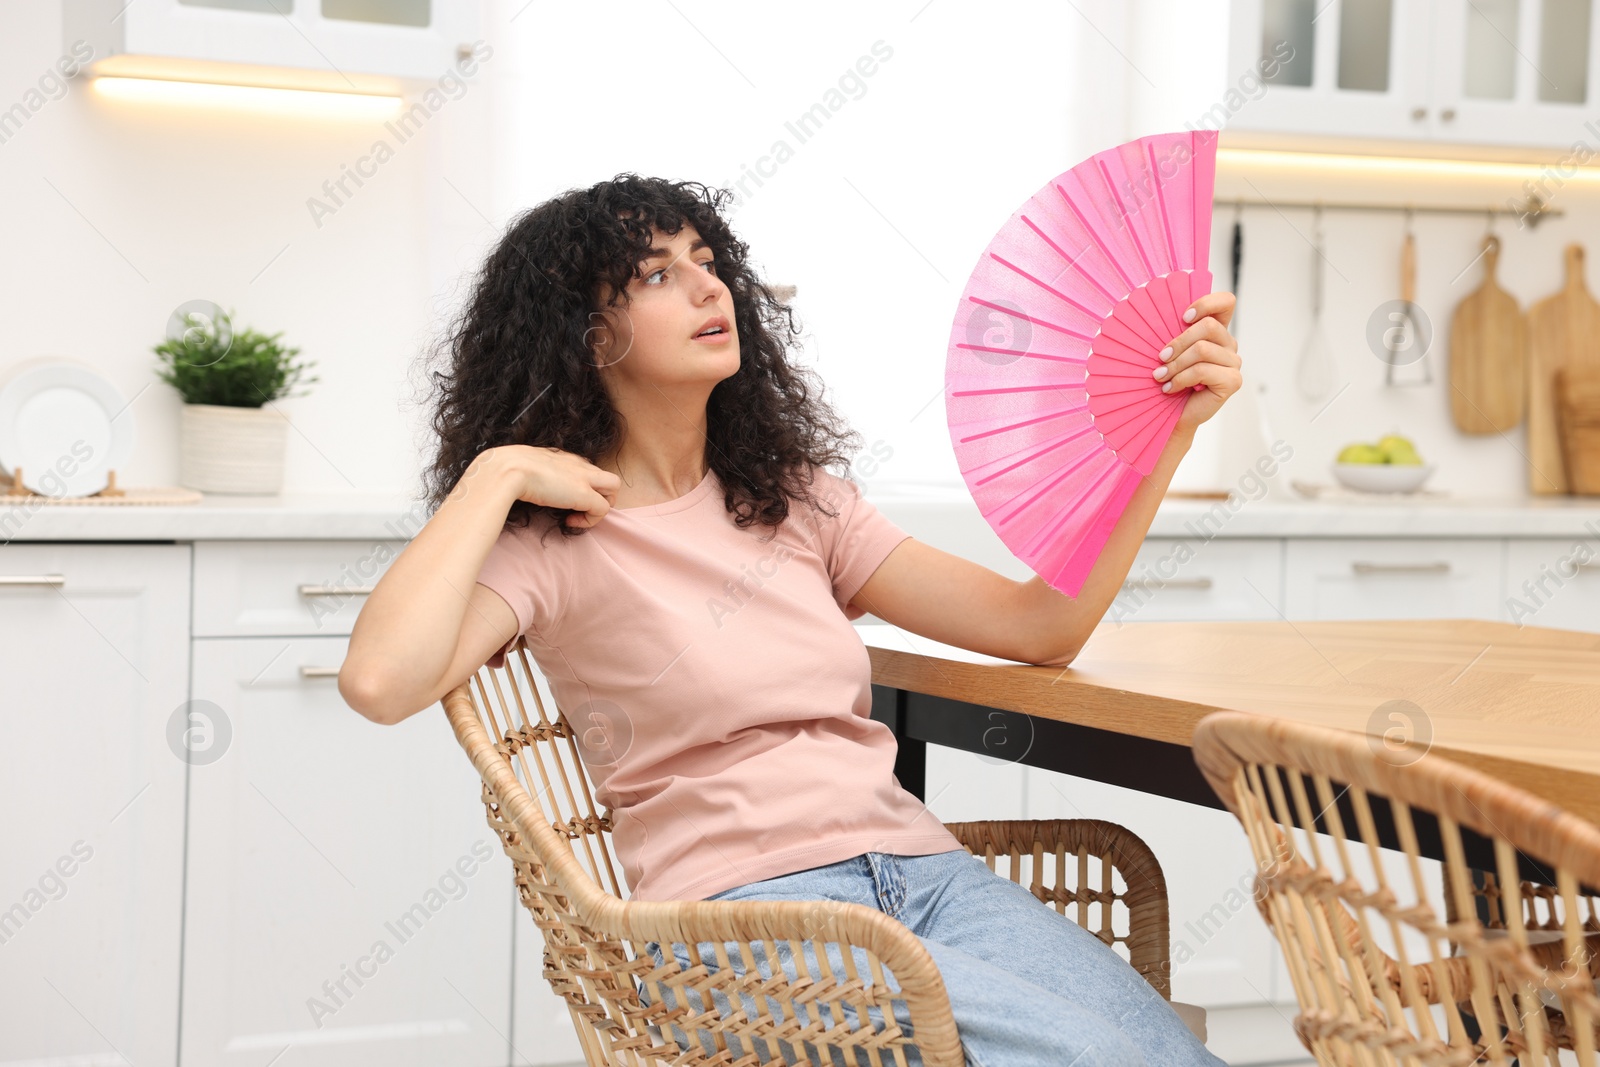 Photo of Young woman waving pink hand fan to cool herself at table in kitchen